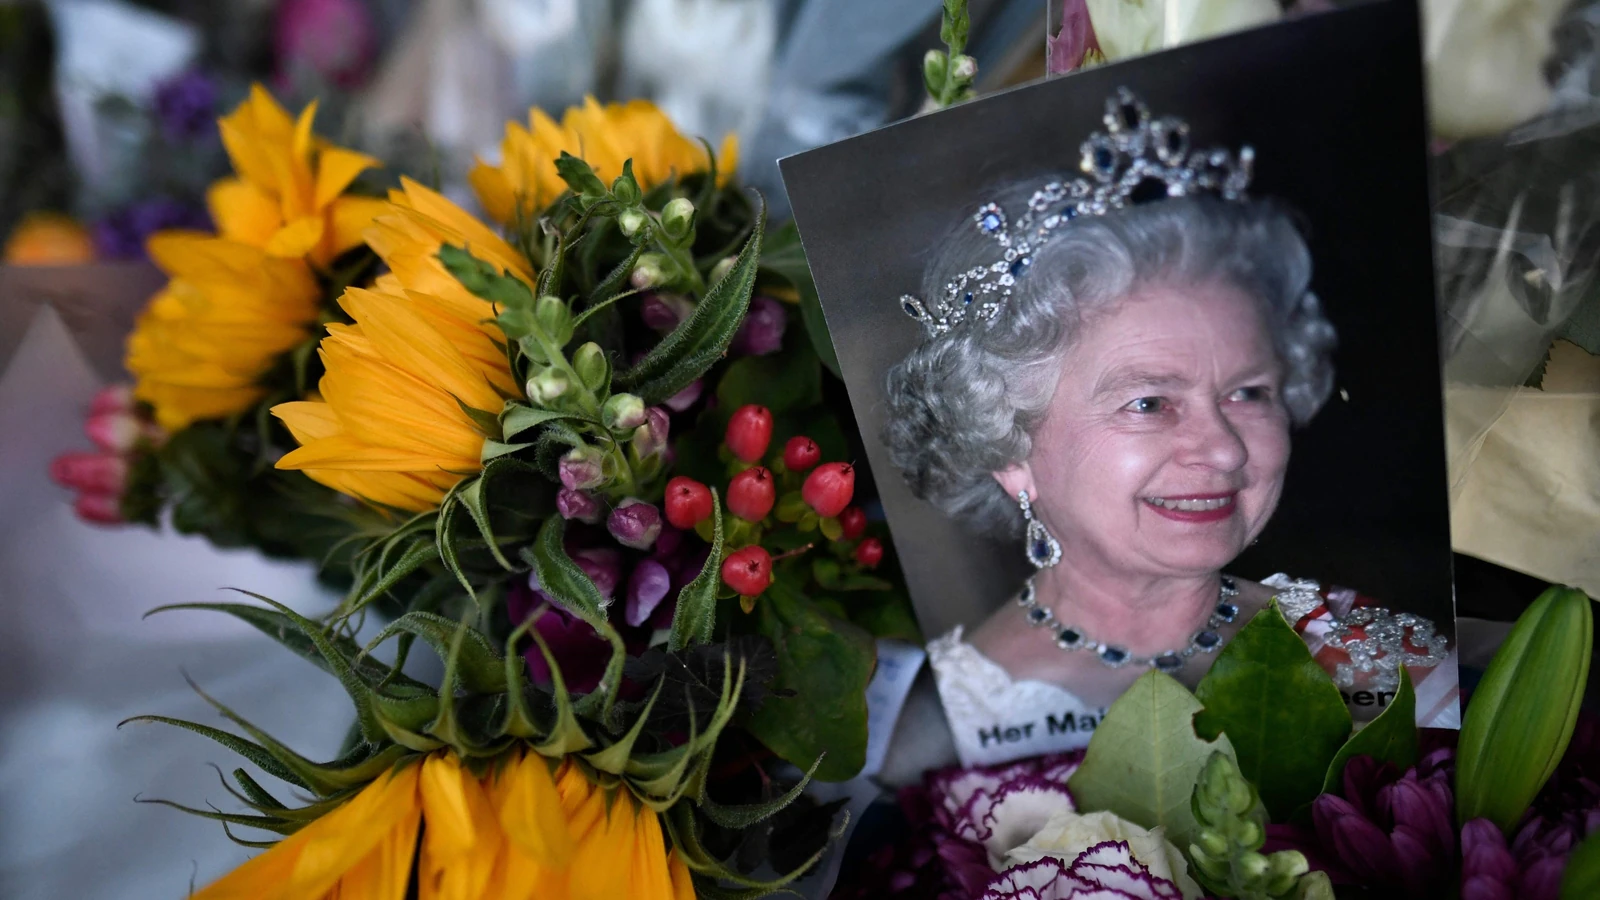 After Queen Elizabeth II's death, who are the world's longest-reigning monarchs? Check list